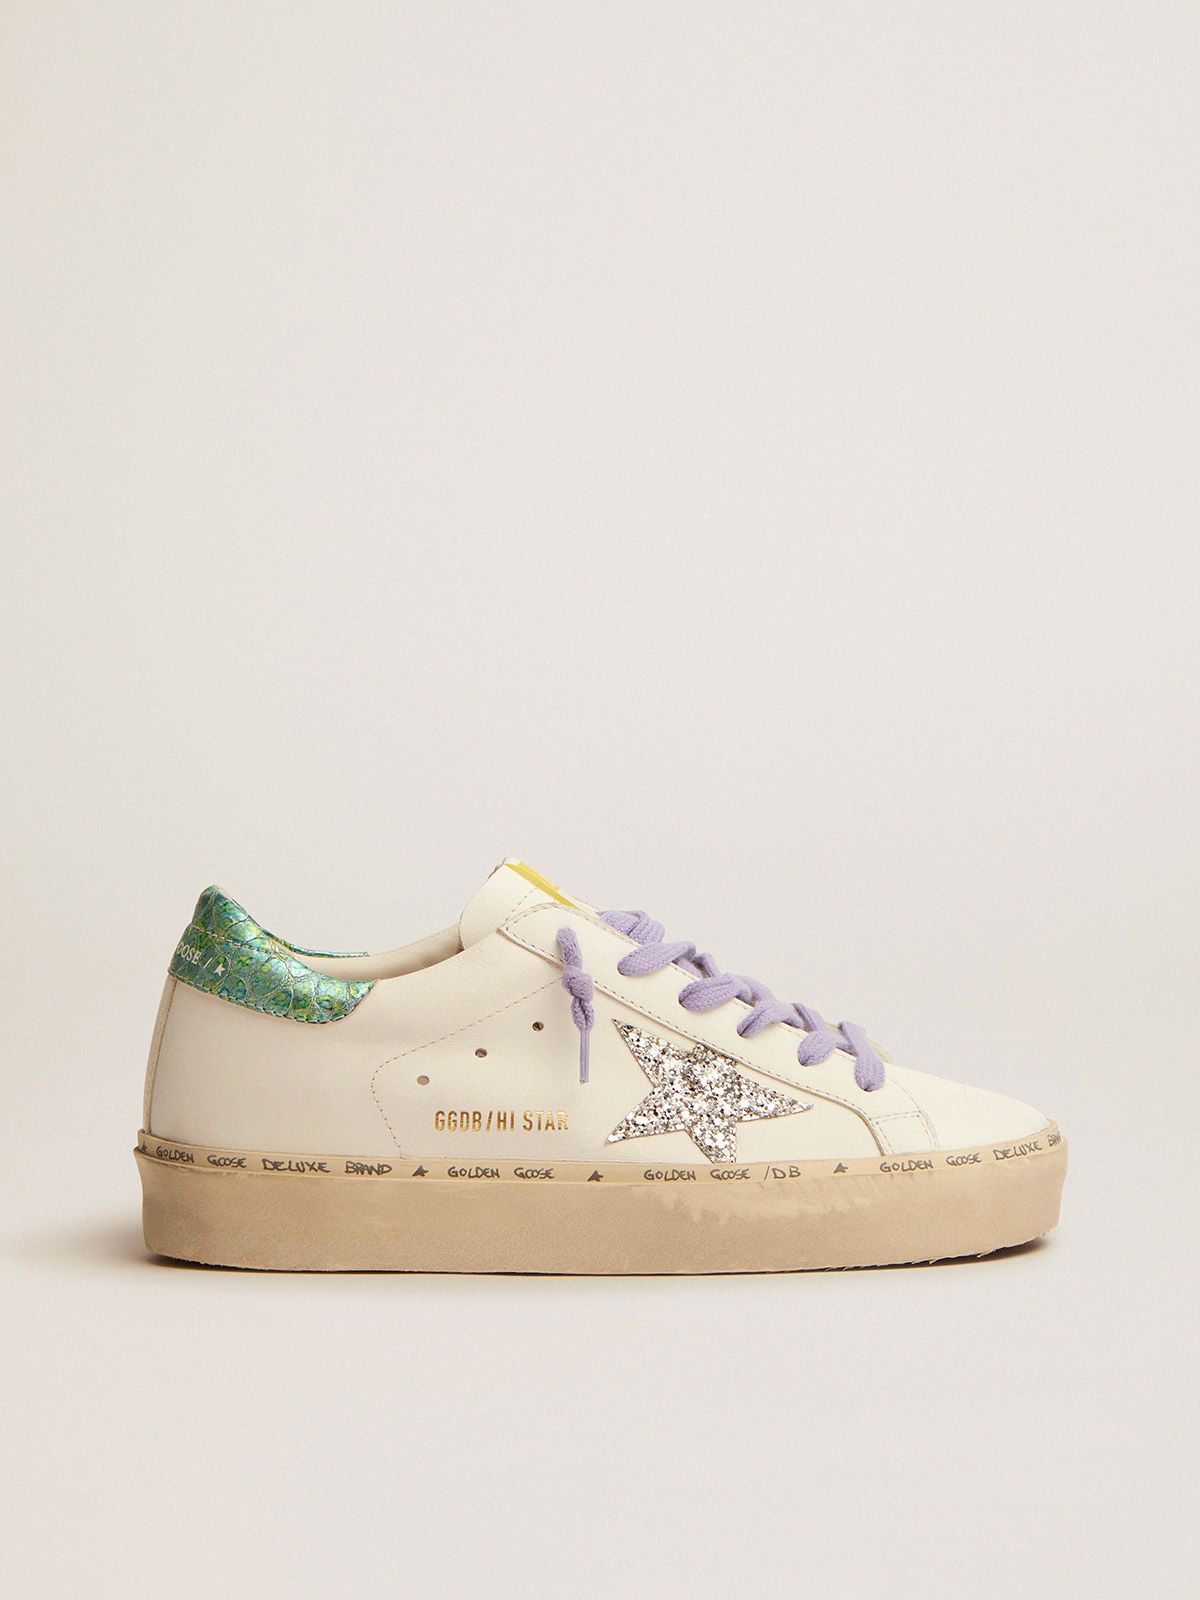 golden goose snake-print glitter Hi star Star LTD aquamarine silver leather and heel sneakers tab with